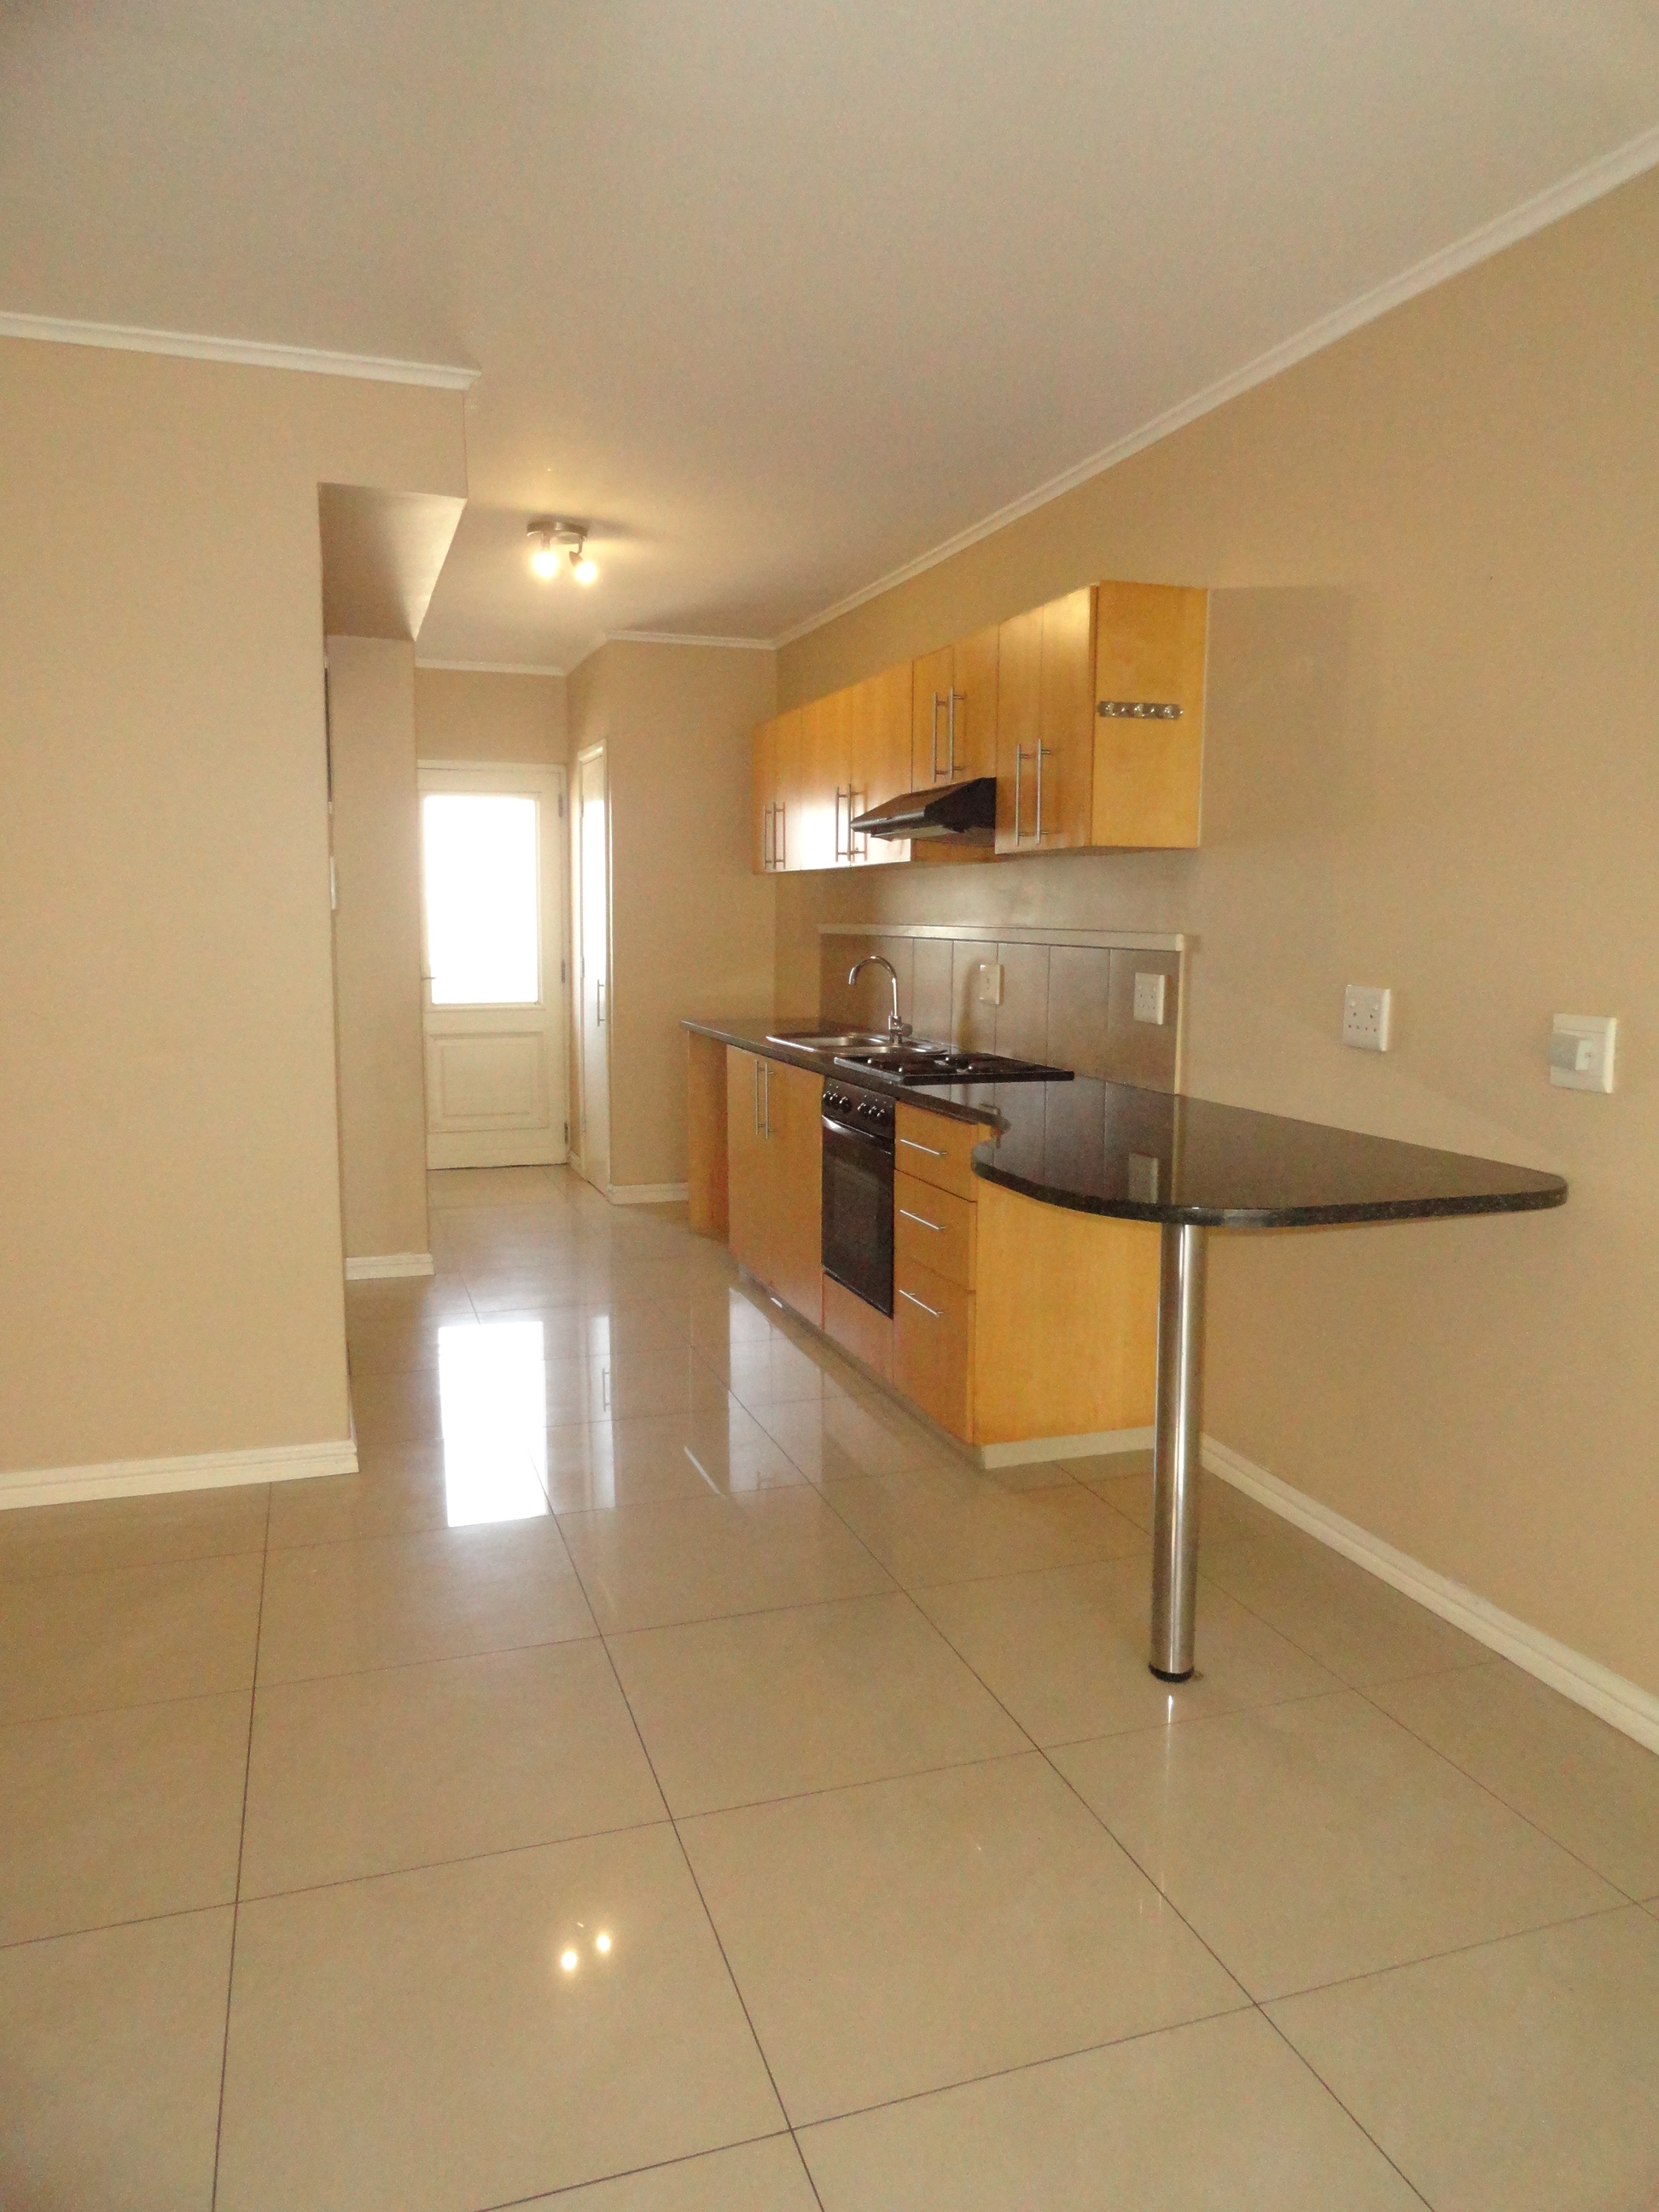 To Let 1 Bedroom Property for Rent in New Town Centre KwaZulu-Natal